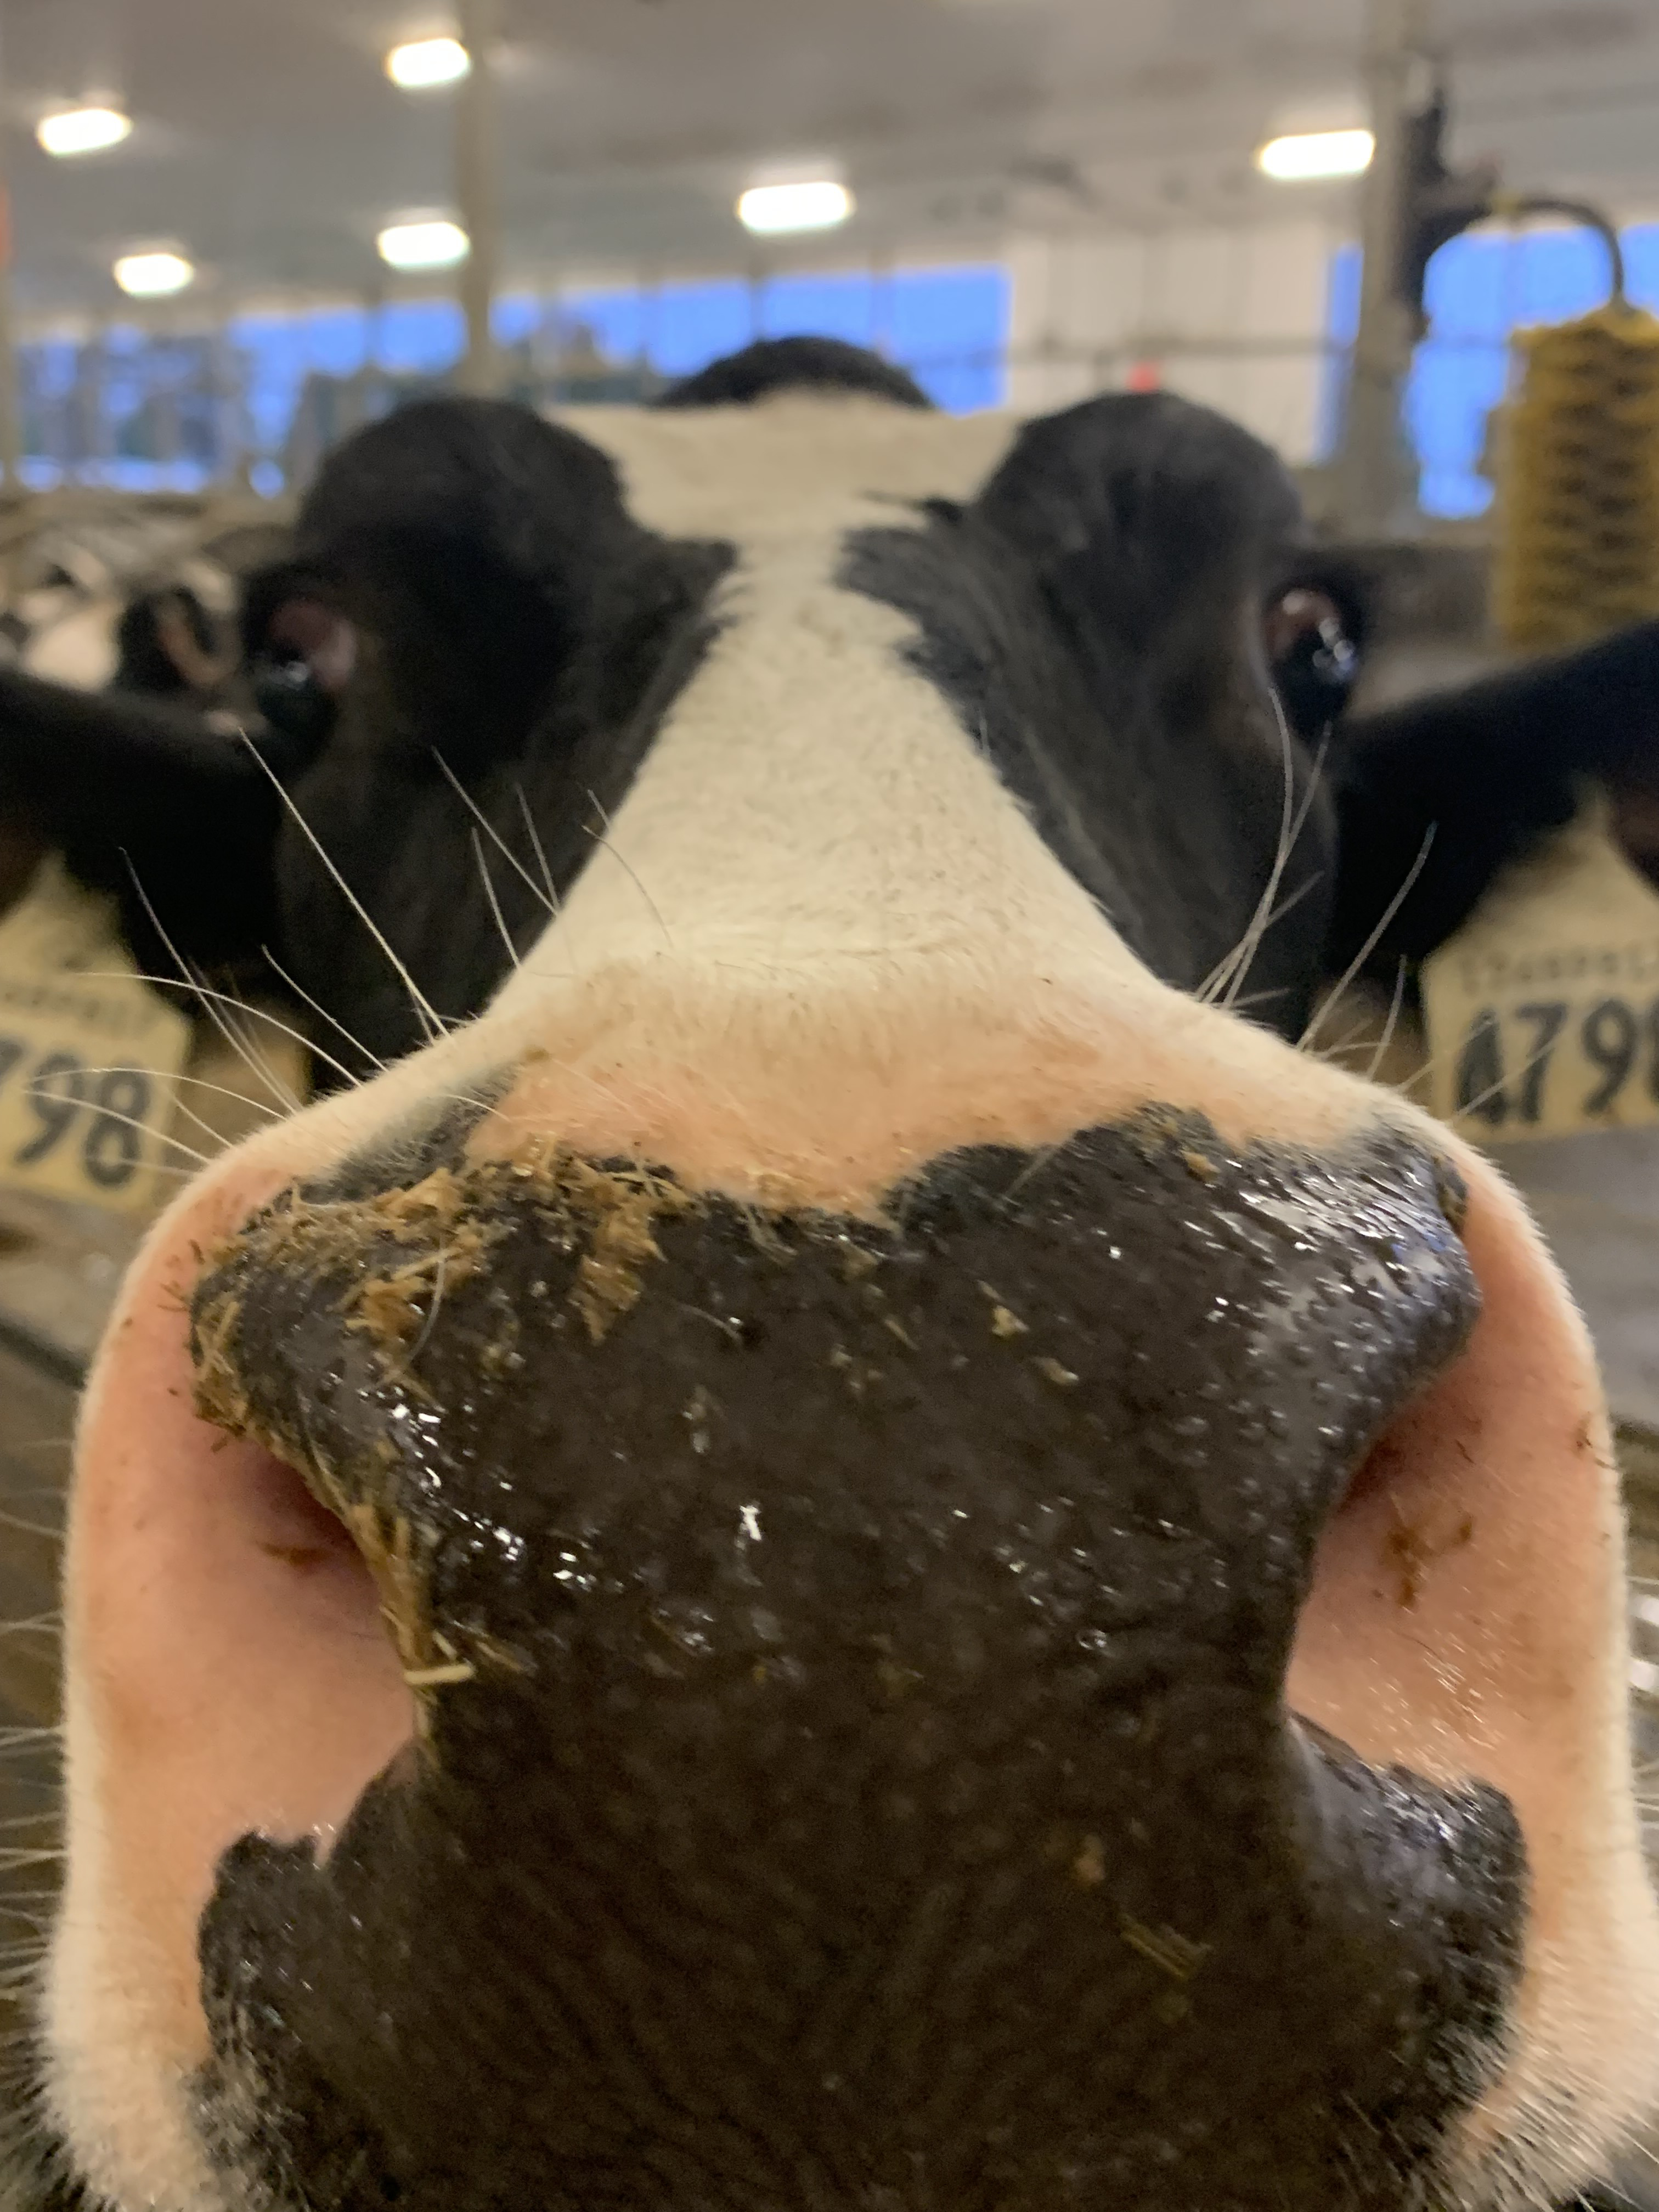 A close up of a cow's face